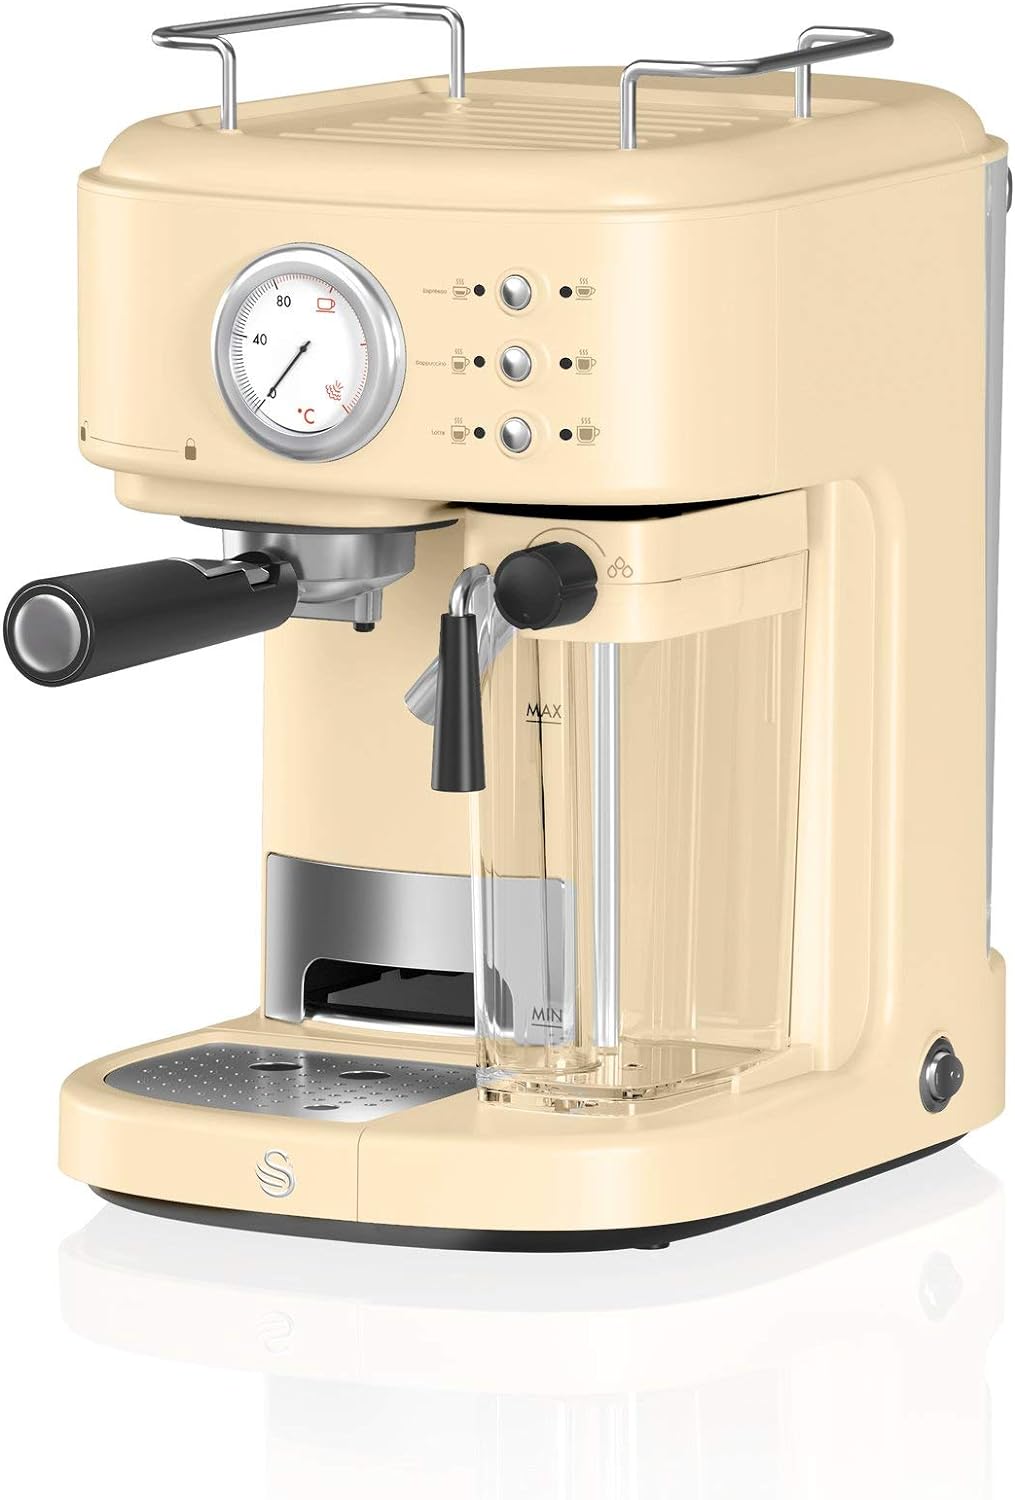 Swan SK22110GN Retro Espresso Coffee Machine with Milk Frother, Steam Pressure Control, 1.2L Detachable Water Tank, 1100W, Retro Green - Amazing Gadgets Outlet